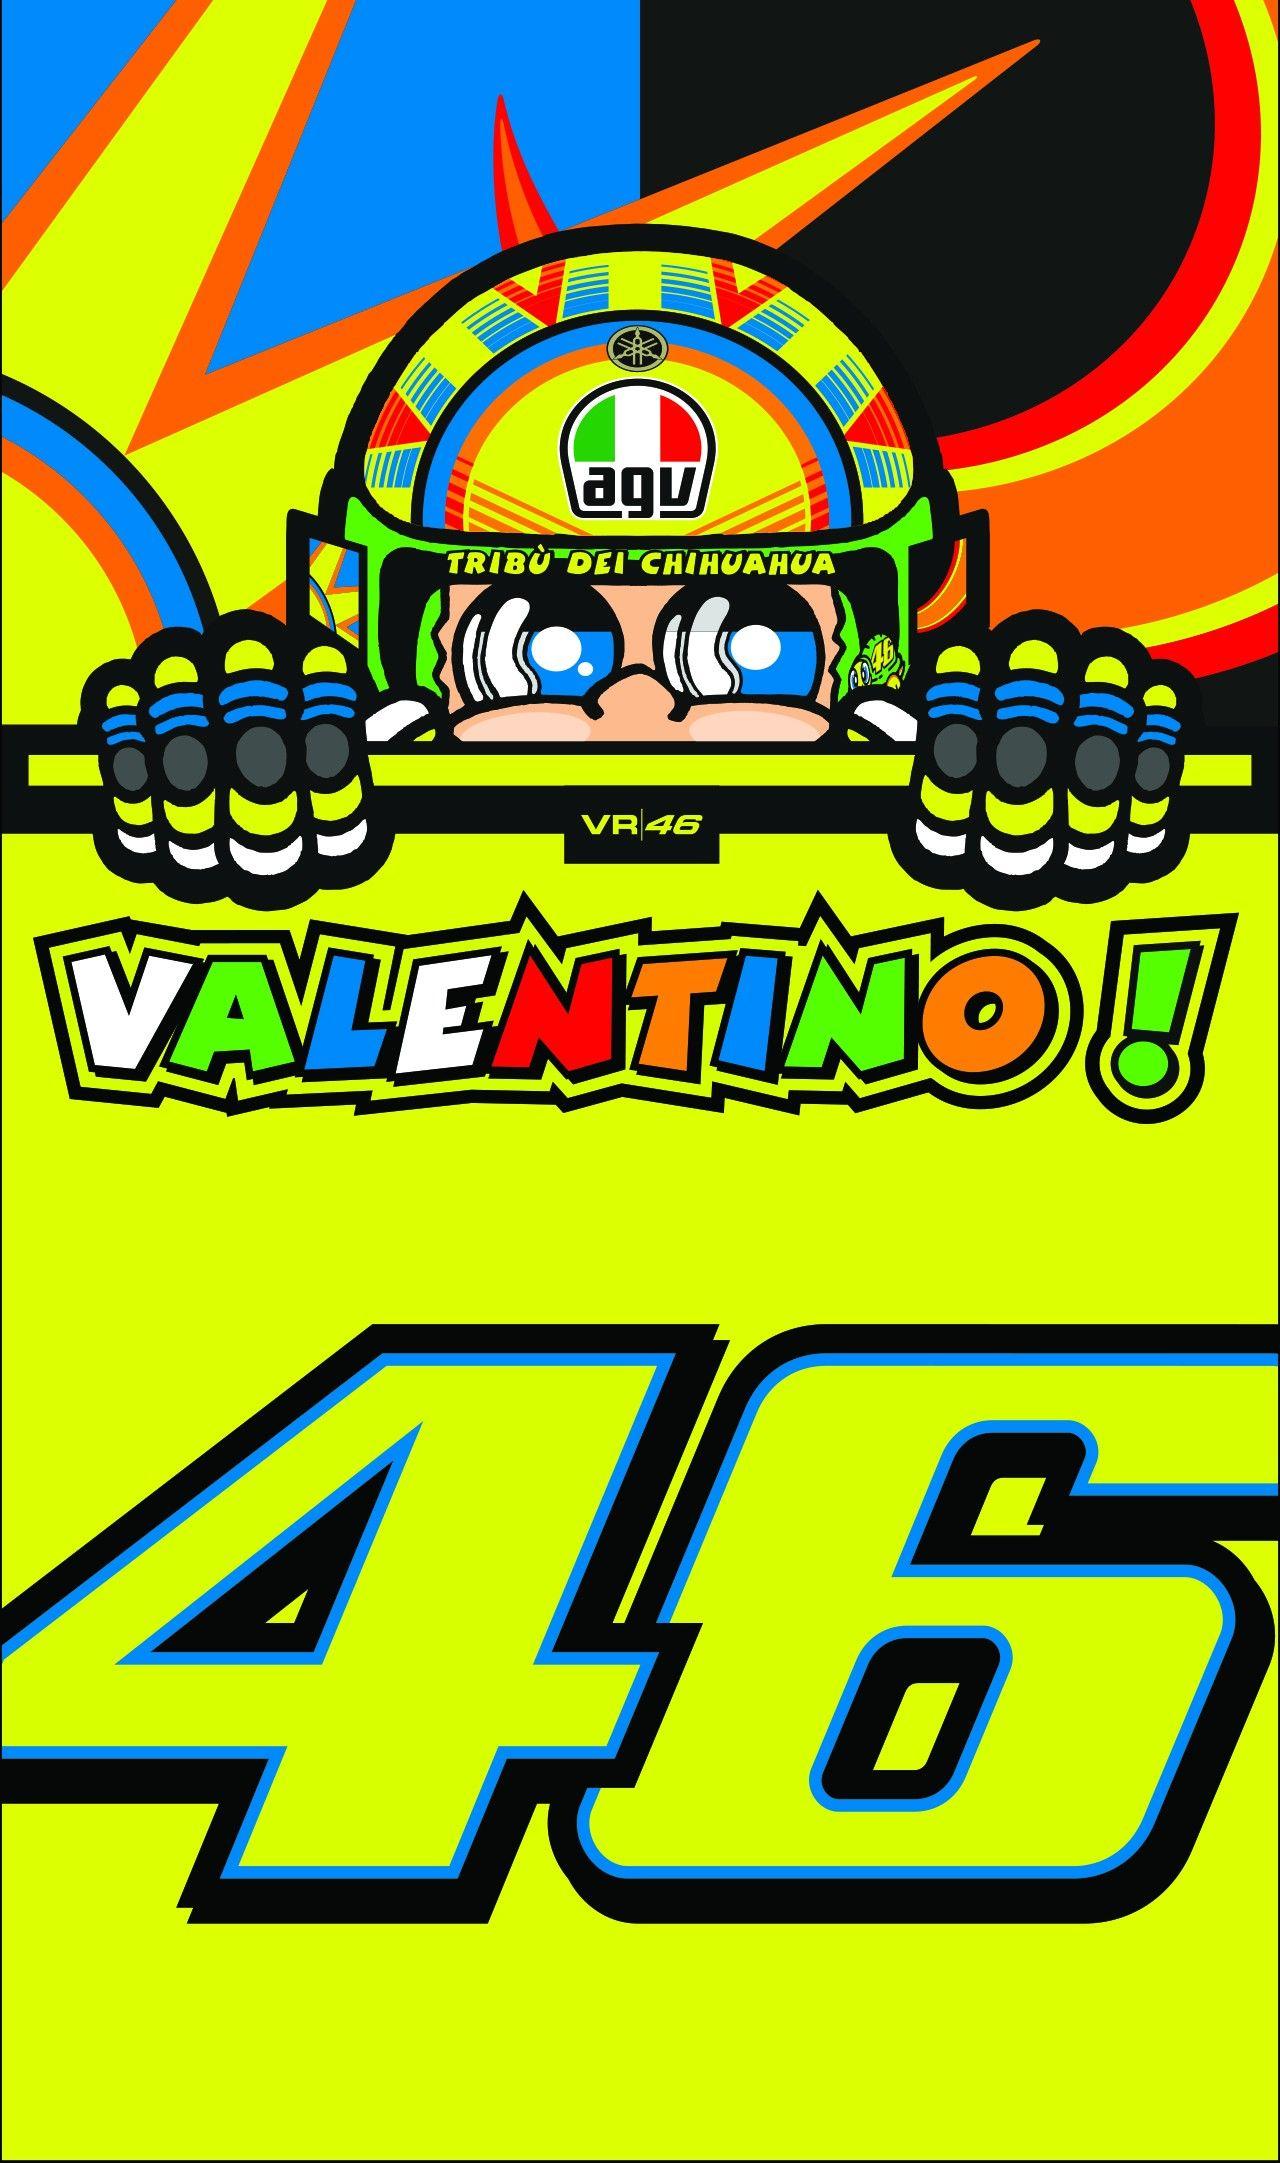 Rossi46 Wallpapers